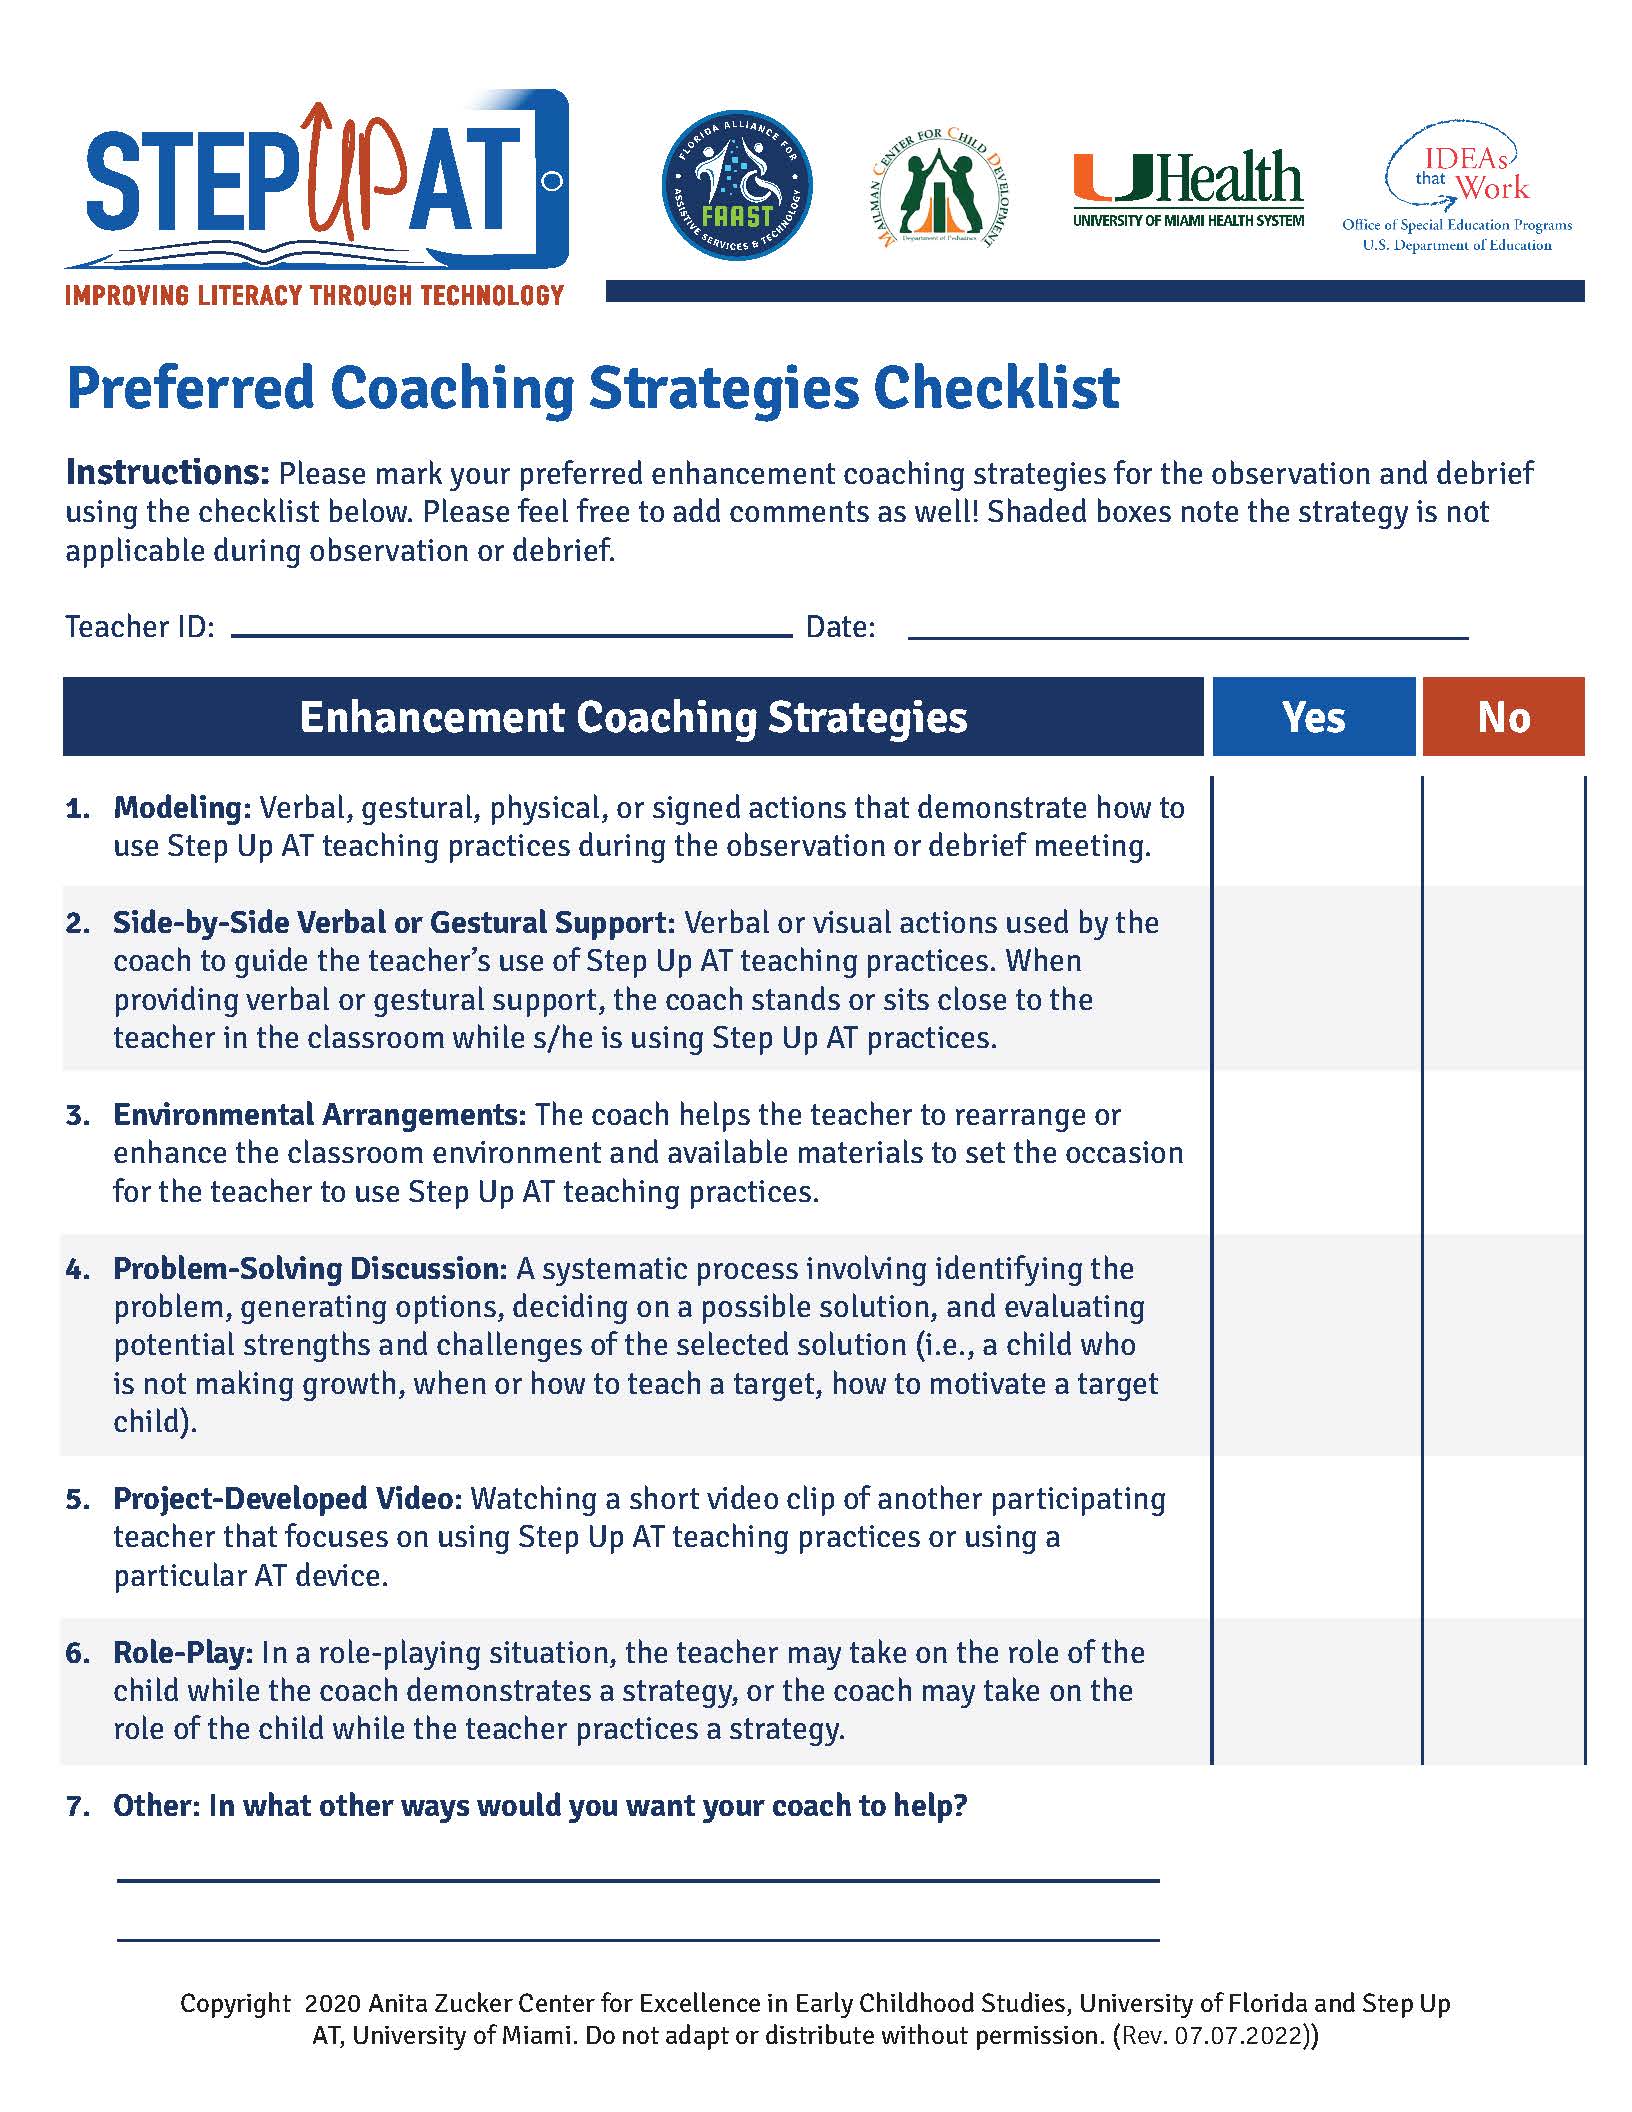 Step Up AT Preferred Coaching Strategies Checklist